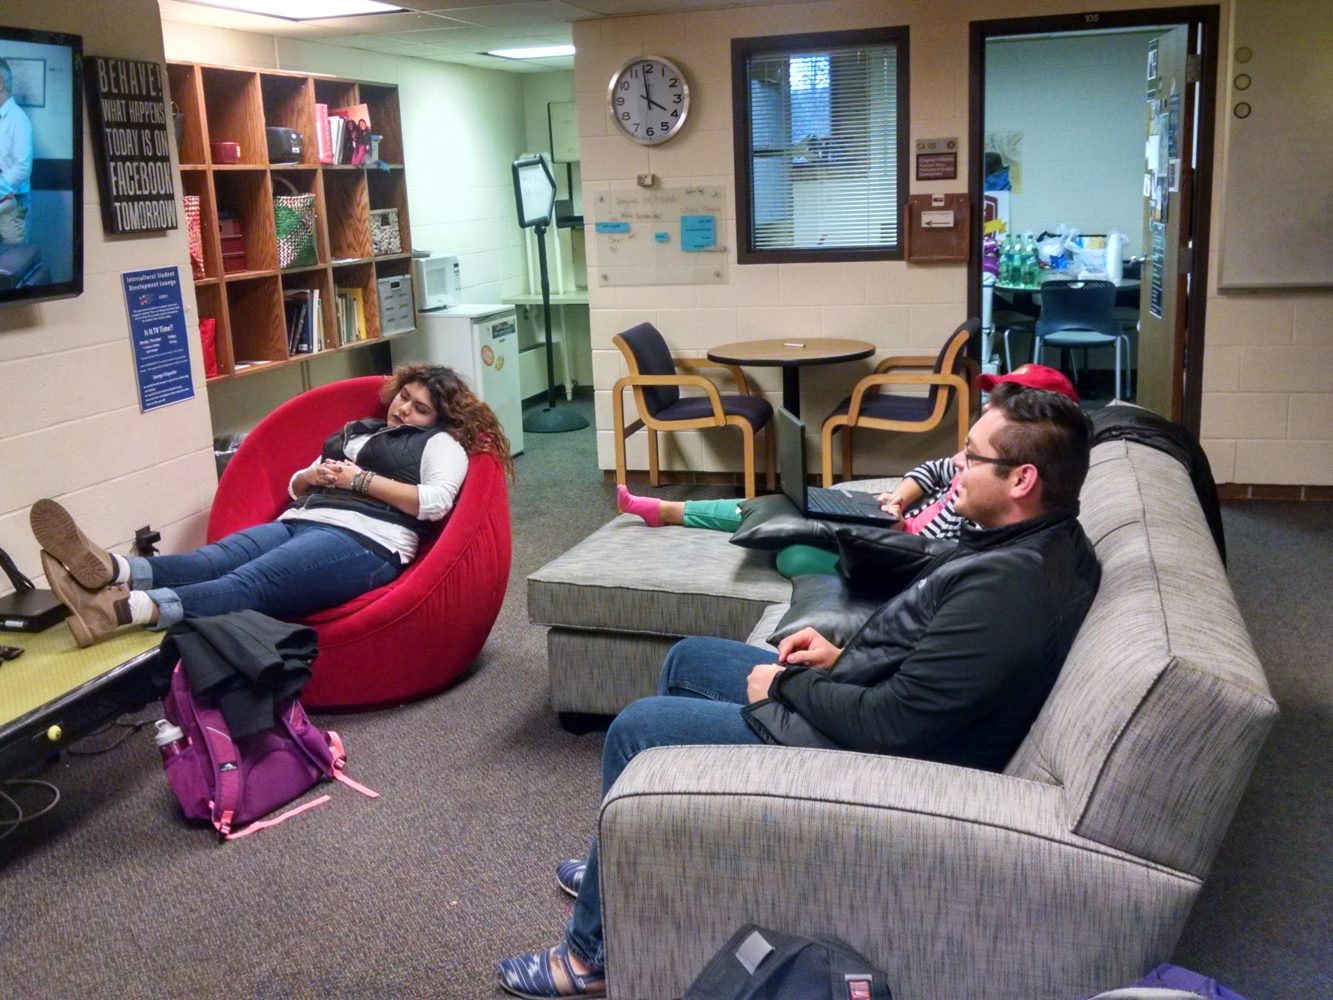 Students hang out in intercultural lounge, another resource developed to help connect students. Photo Credit Katelyn Bosch